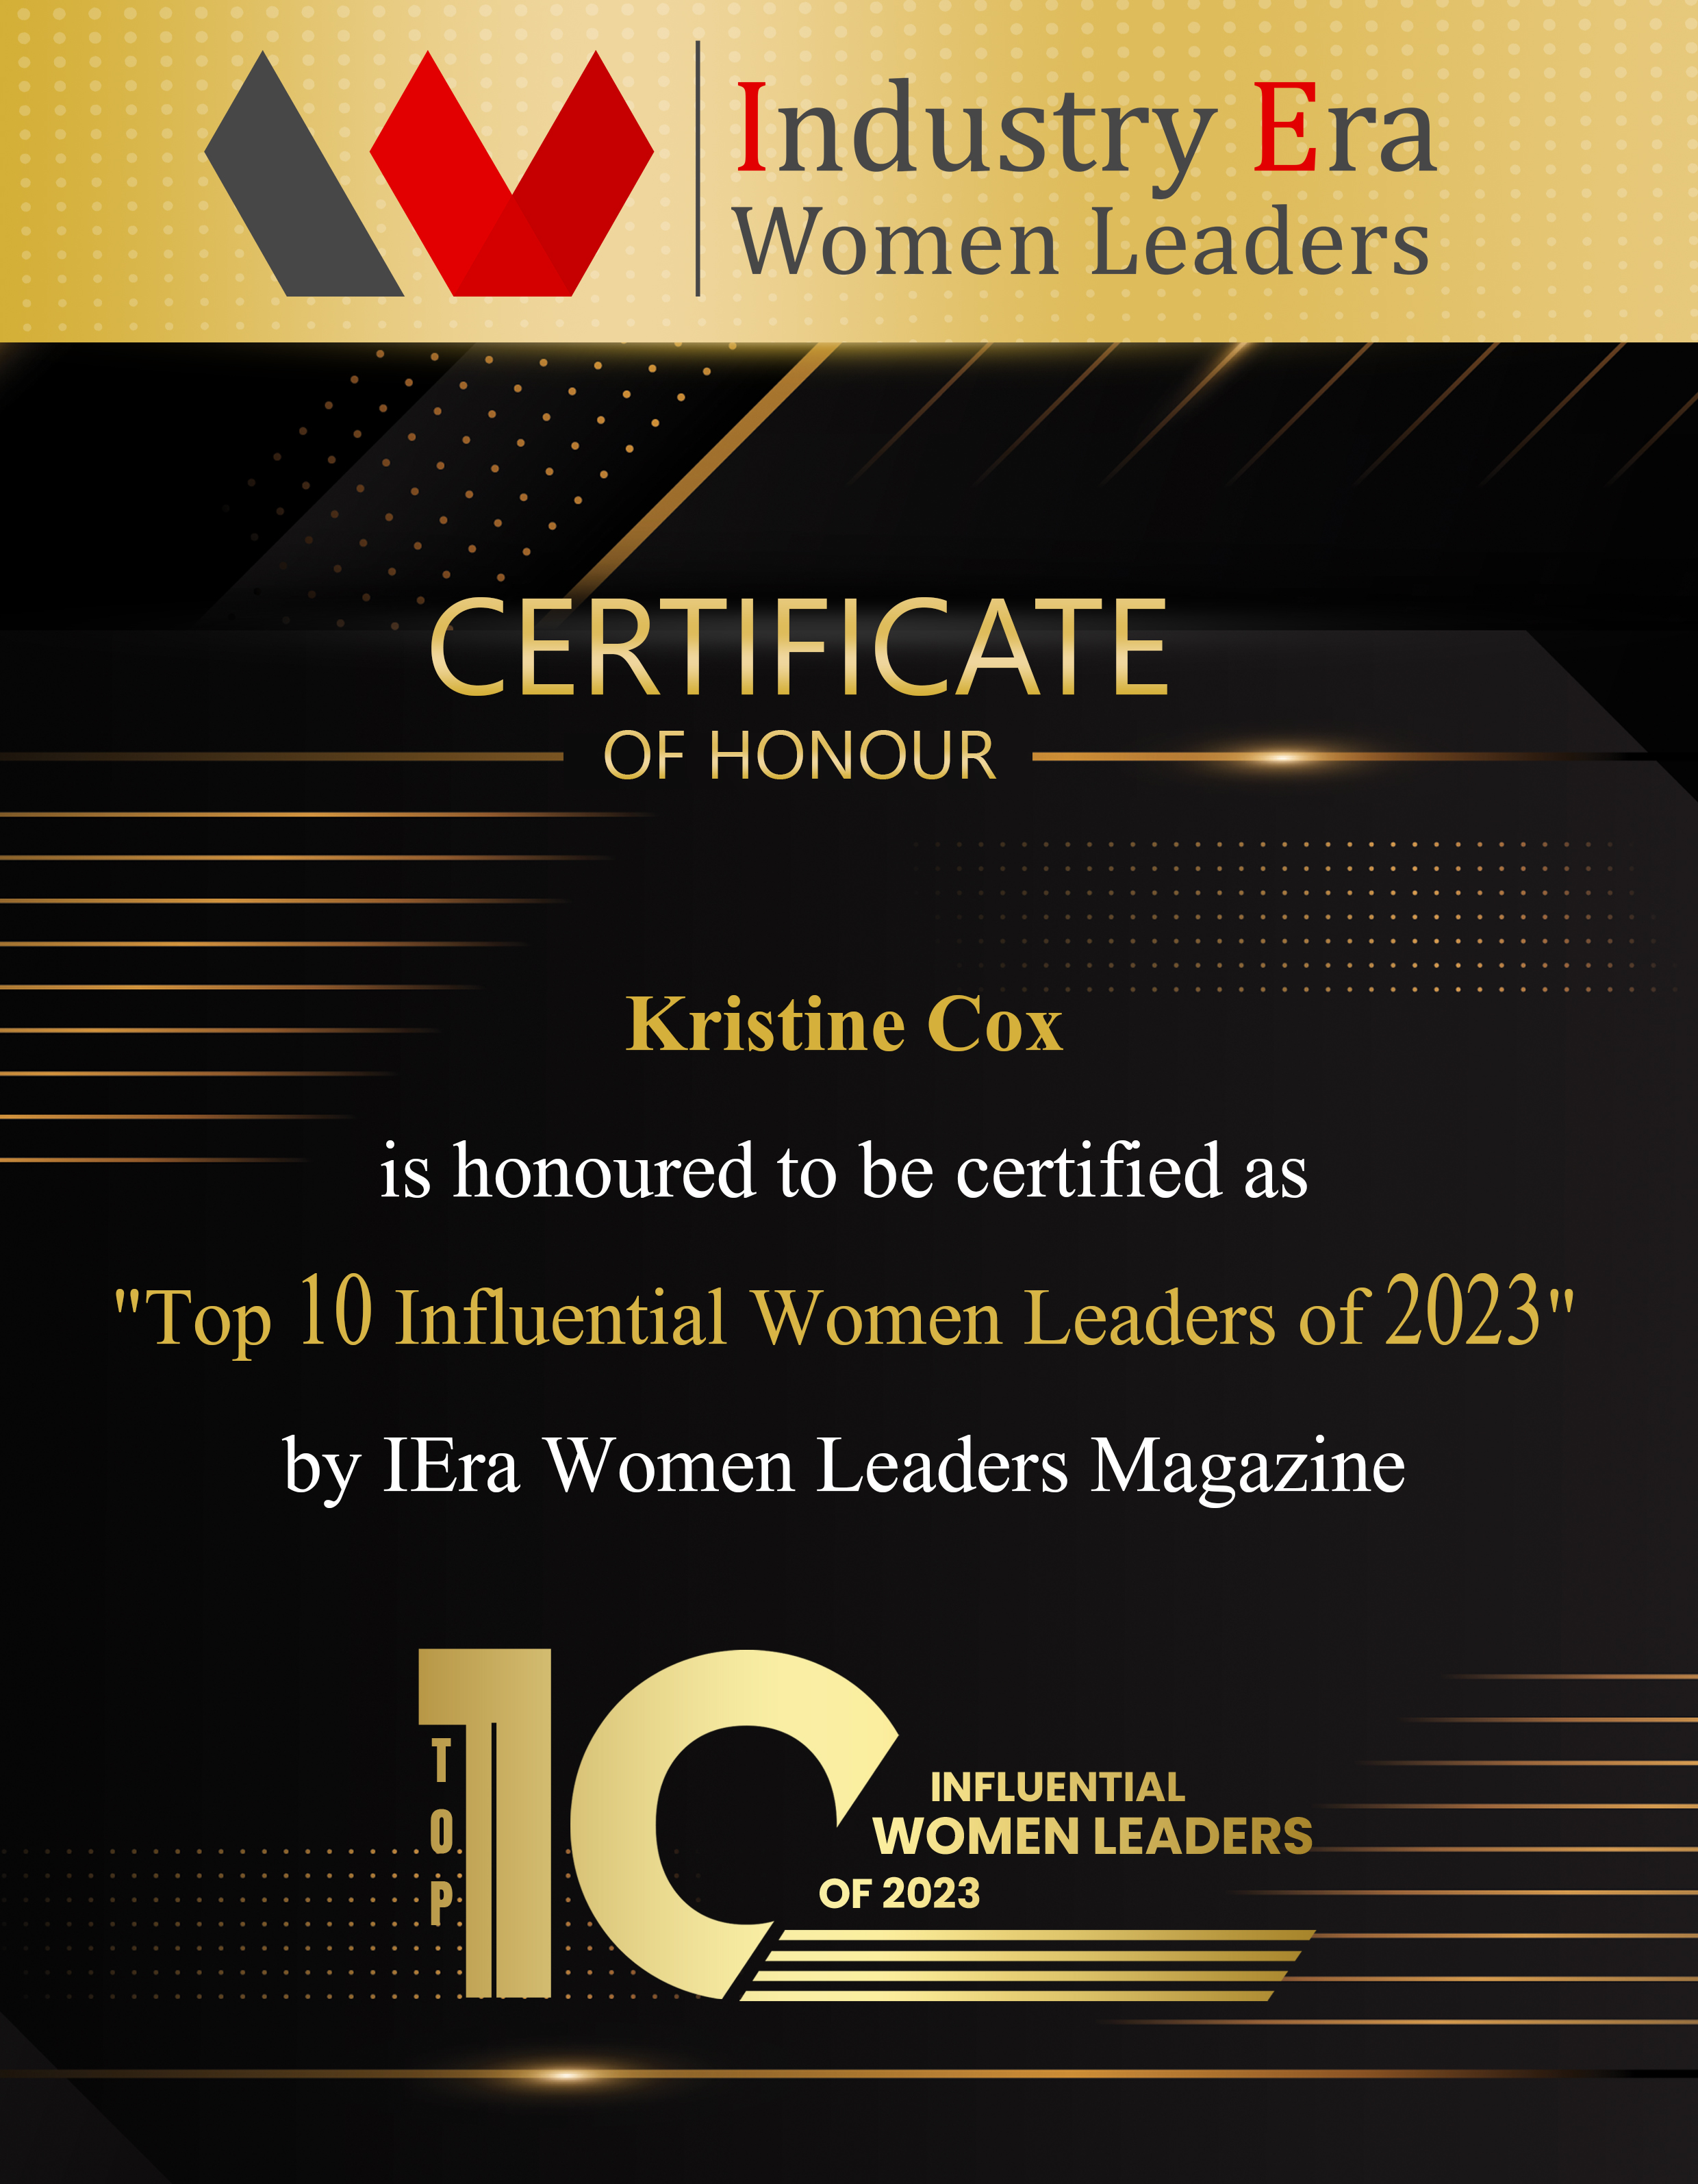 Kristine Cox, General Manager of Playa Largo Resort & Spa, Top 10 Influential Women Leaders of 2023